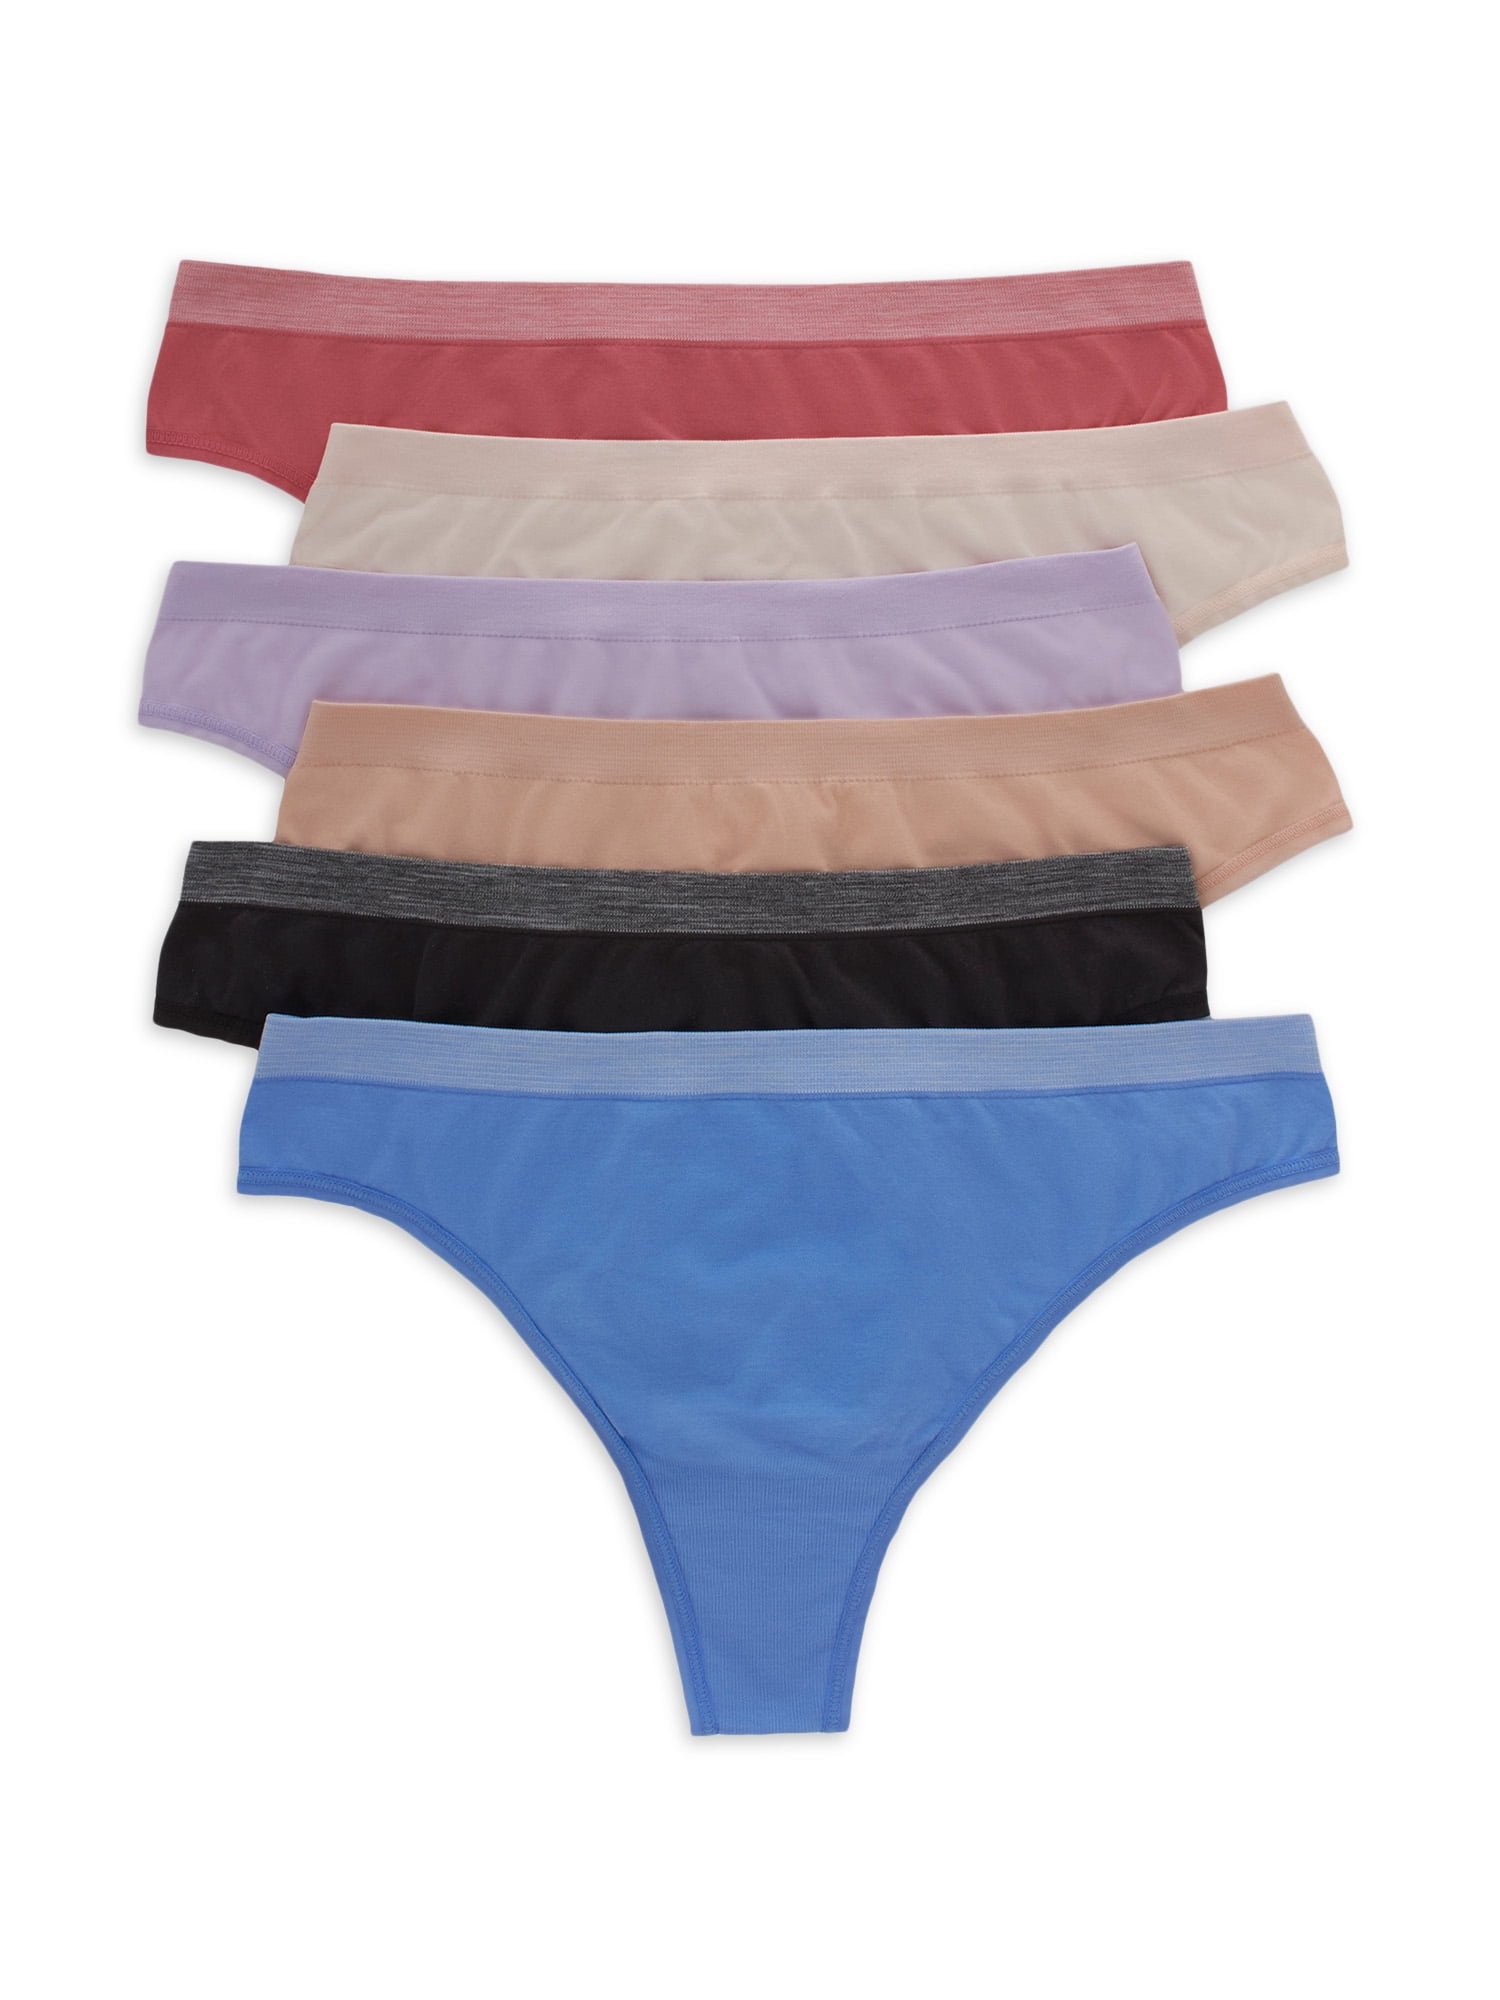 3 Pack True and Co Seamless Thongs XL 16-18 No Panty Line